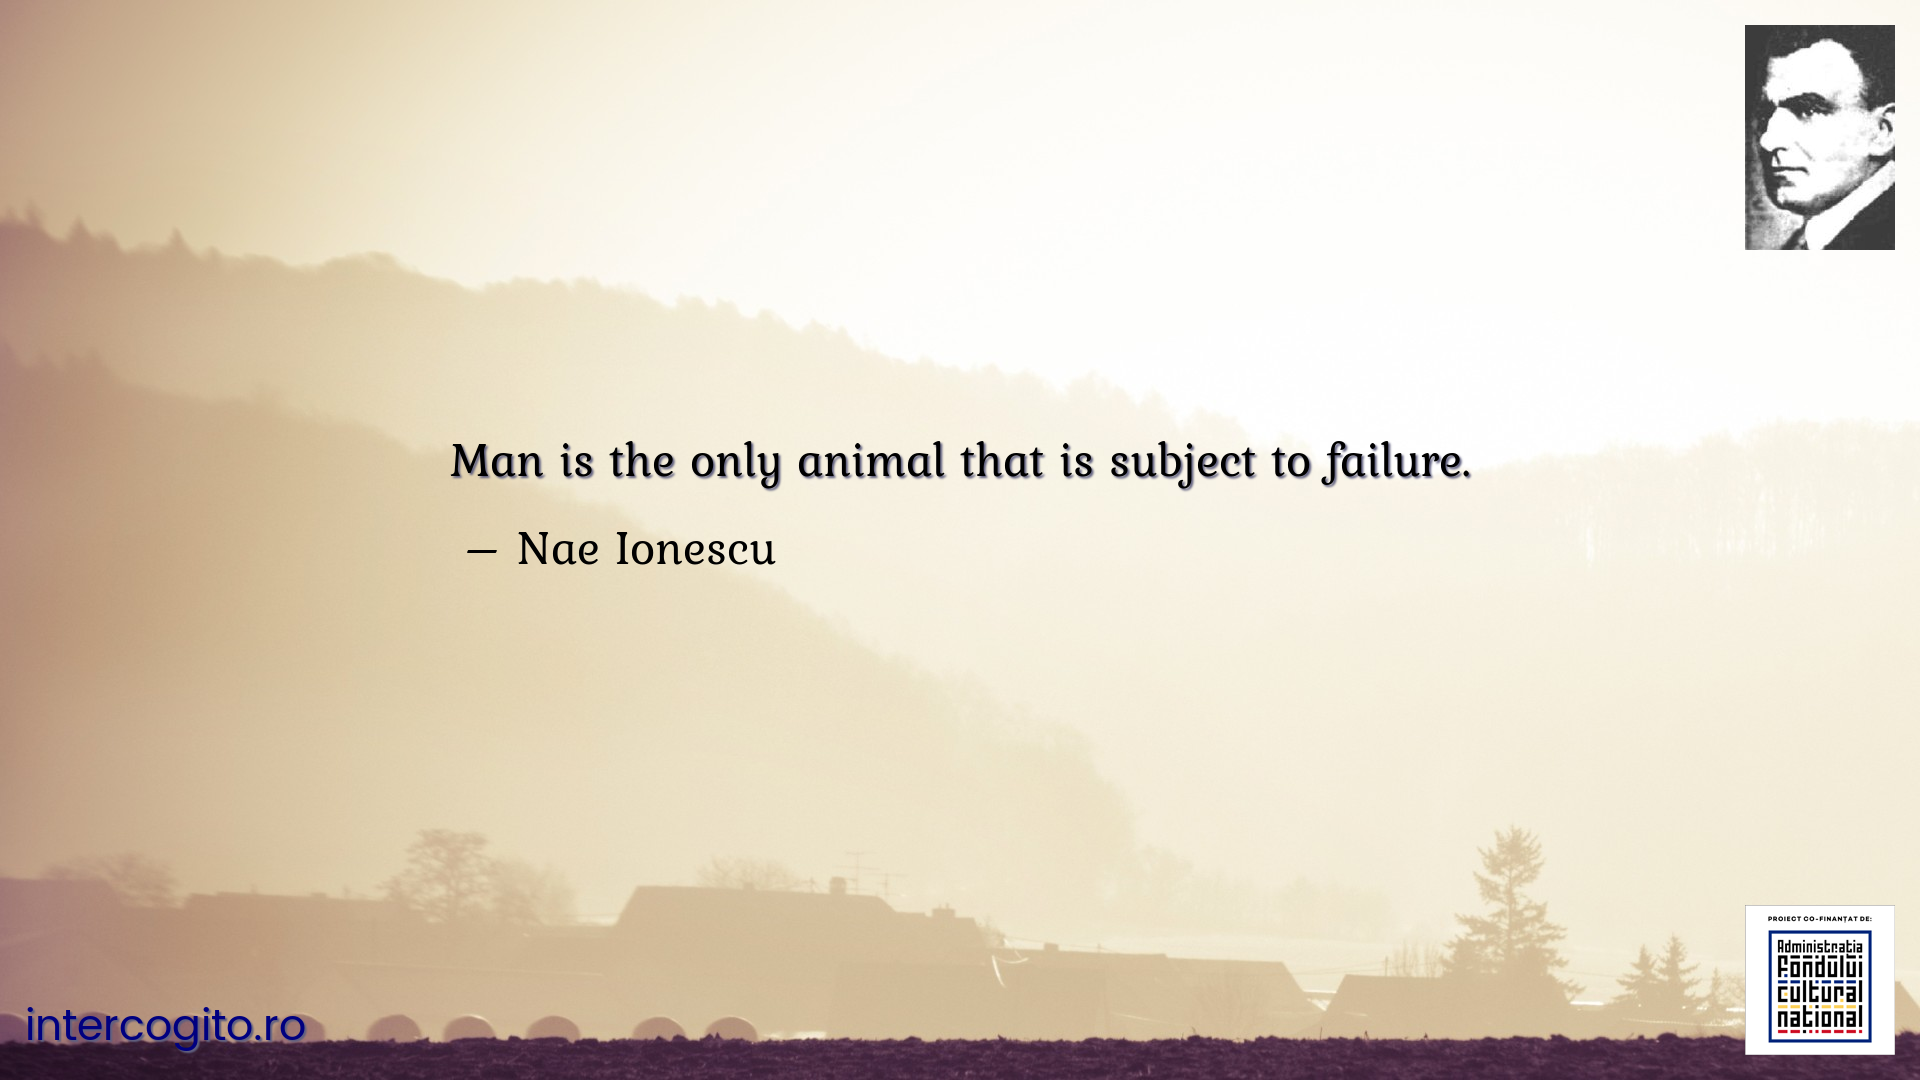 Man is the only animal that is subject to failure.